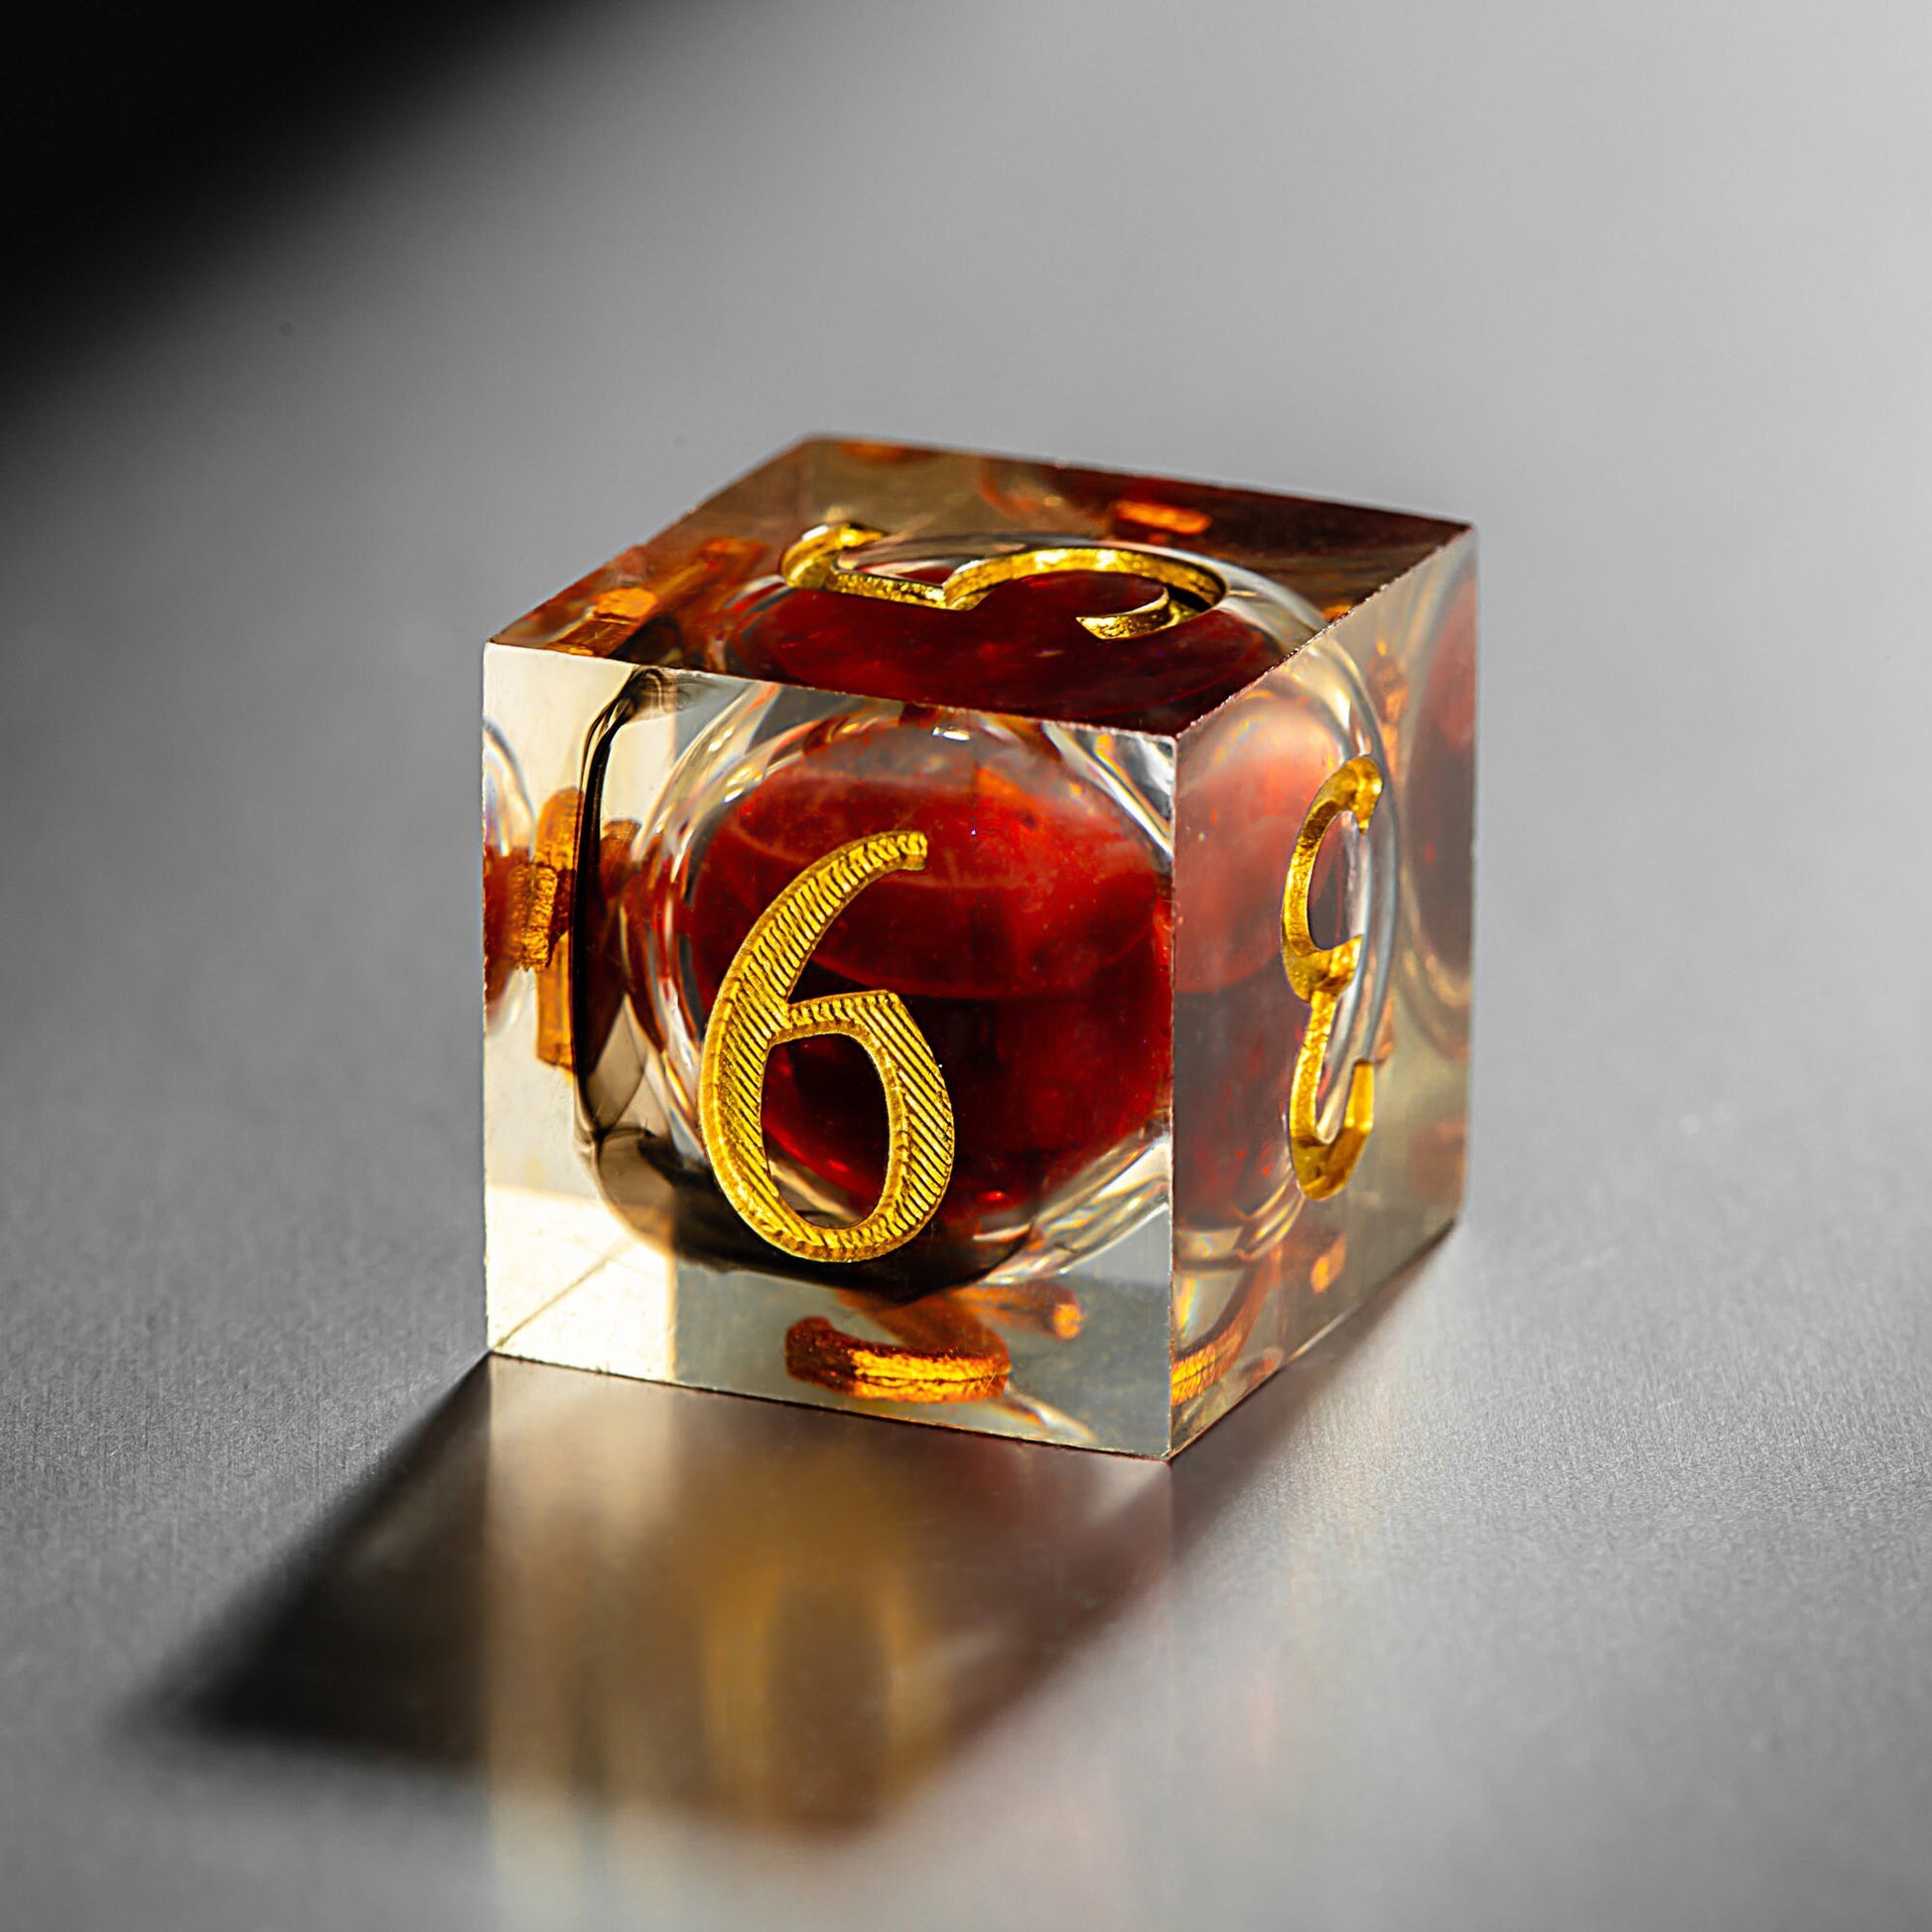 Blood Red Liquid Core F Word DnD D&D Dice Chonk D20 - CrystalMaggie